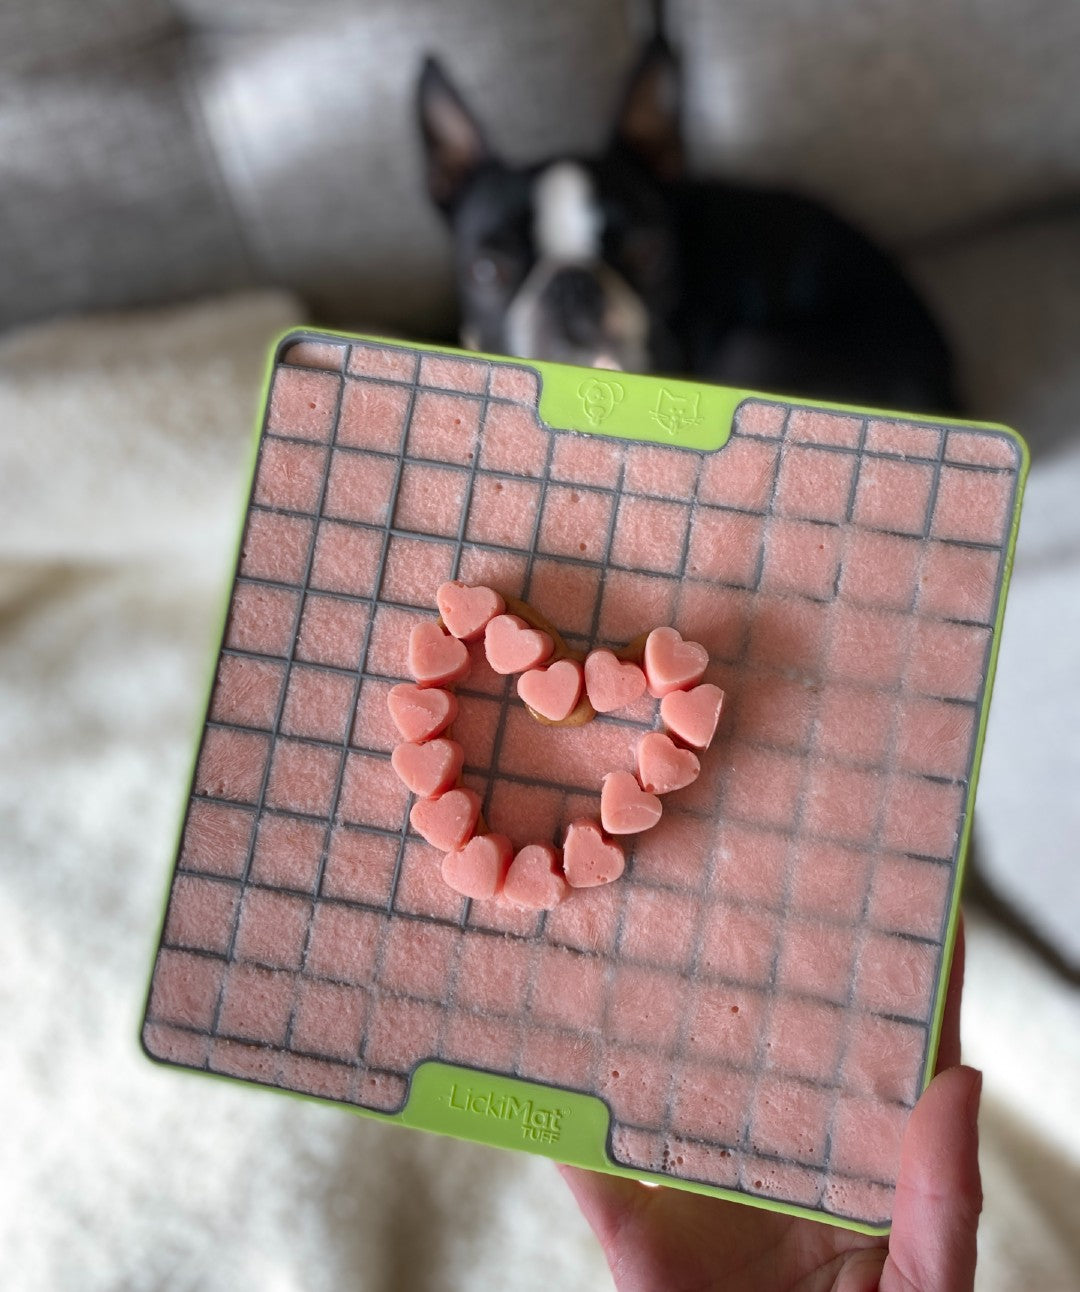 ▷ Lickimat Soother Tuff Lick Mat For Dogs 【 Dog 】